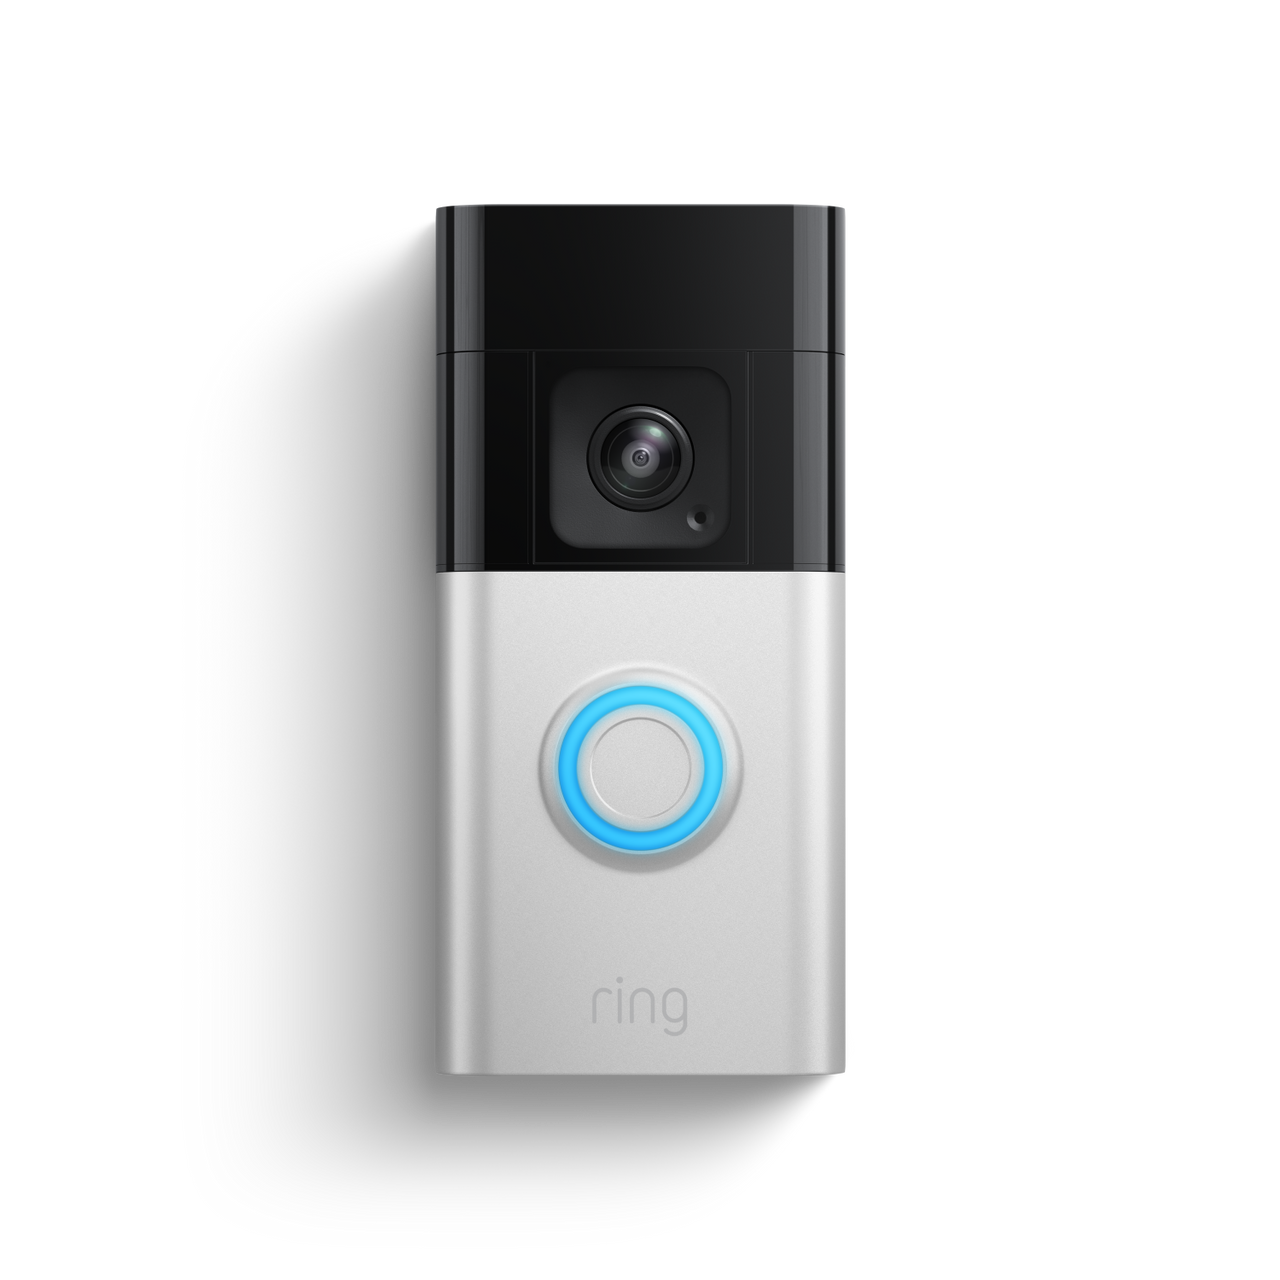 products/ring_battery-video-doorbell-pro_sn_01_product_front_wall_1500x1500_b55c2215-800f-40c4-87a9-2cb8a5530d39.png